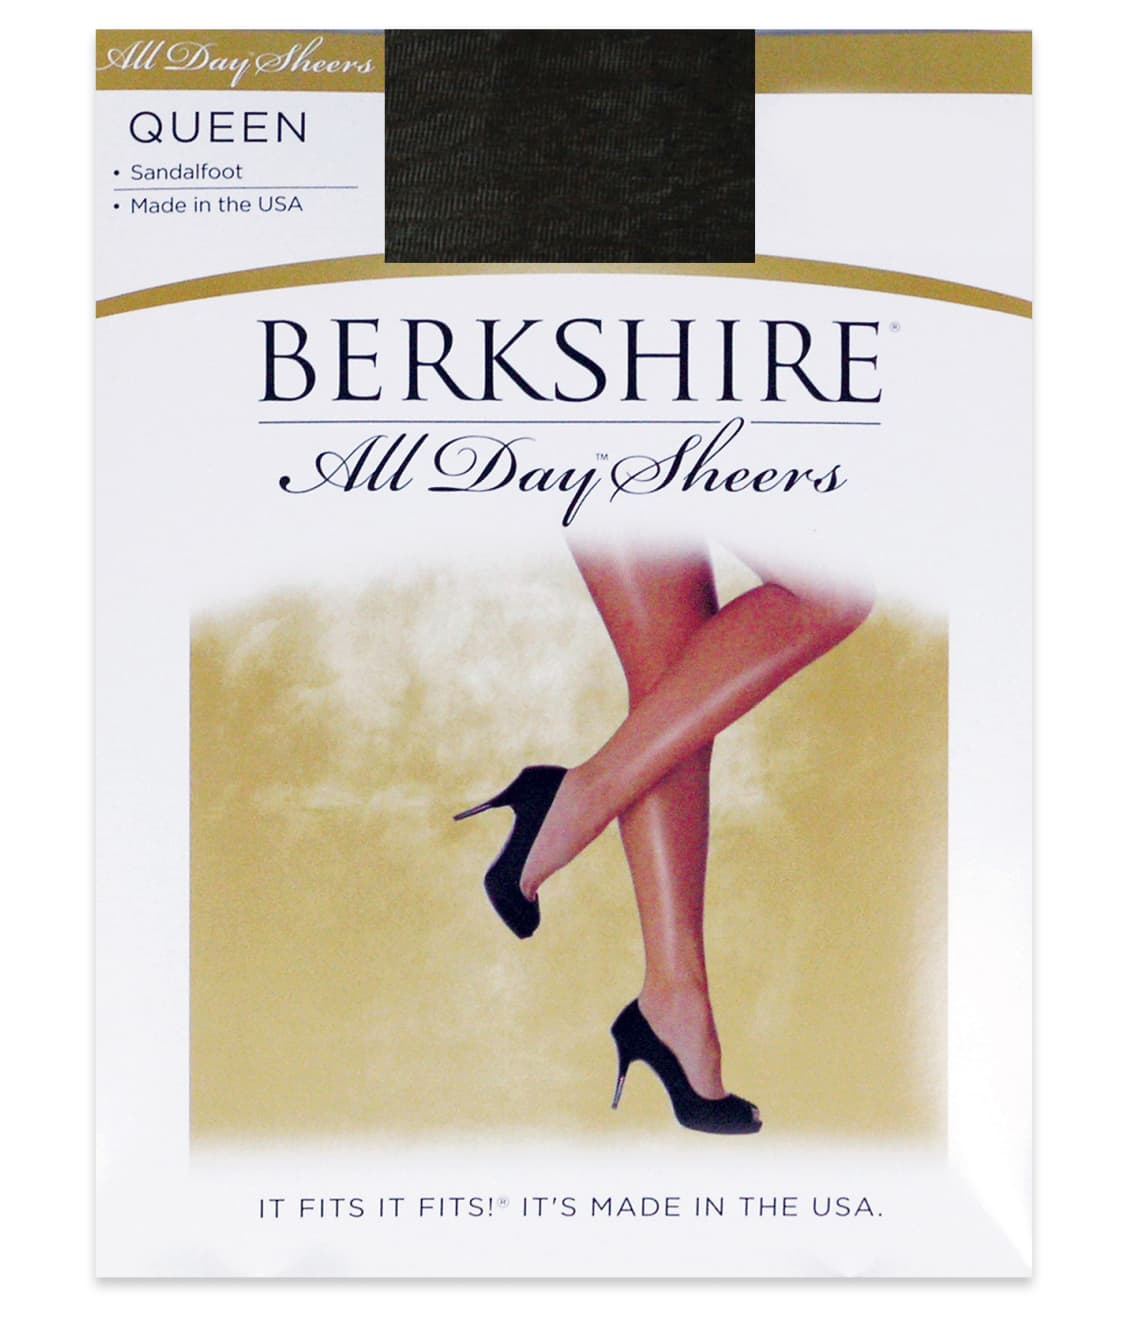 Berkshire: Queen All Day Sheers Pantyhose 4416